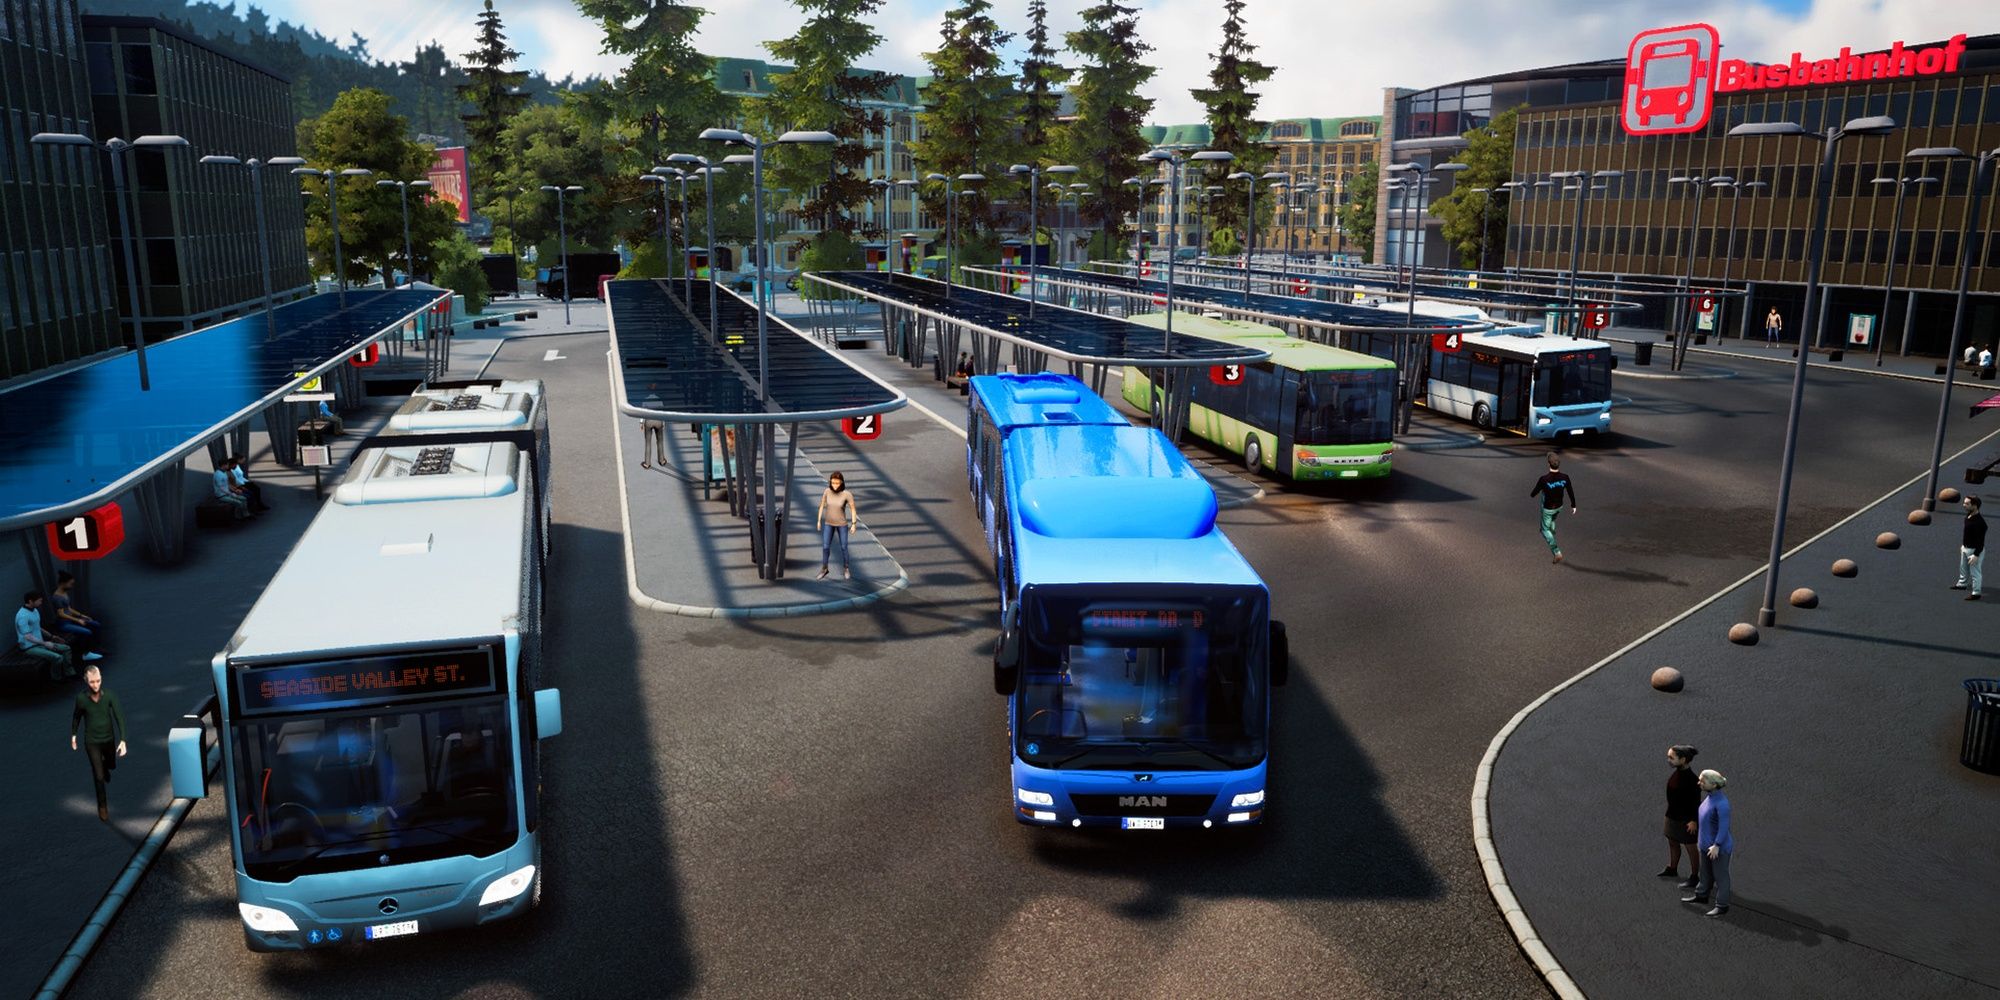 Bus Simulator 18: A Fleet Of Buses Waiting In The Station